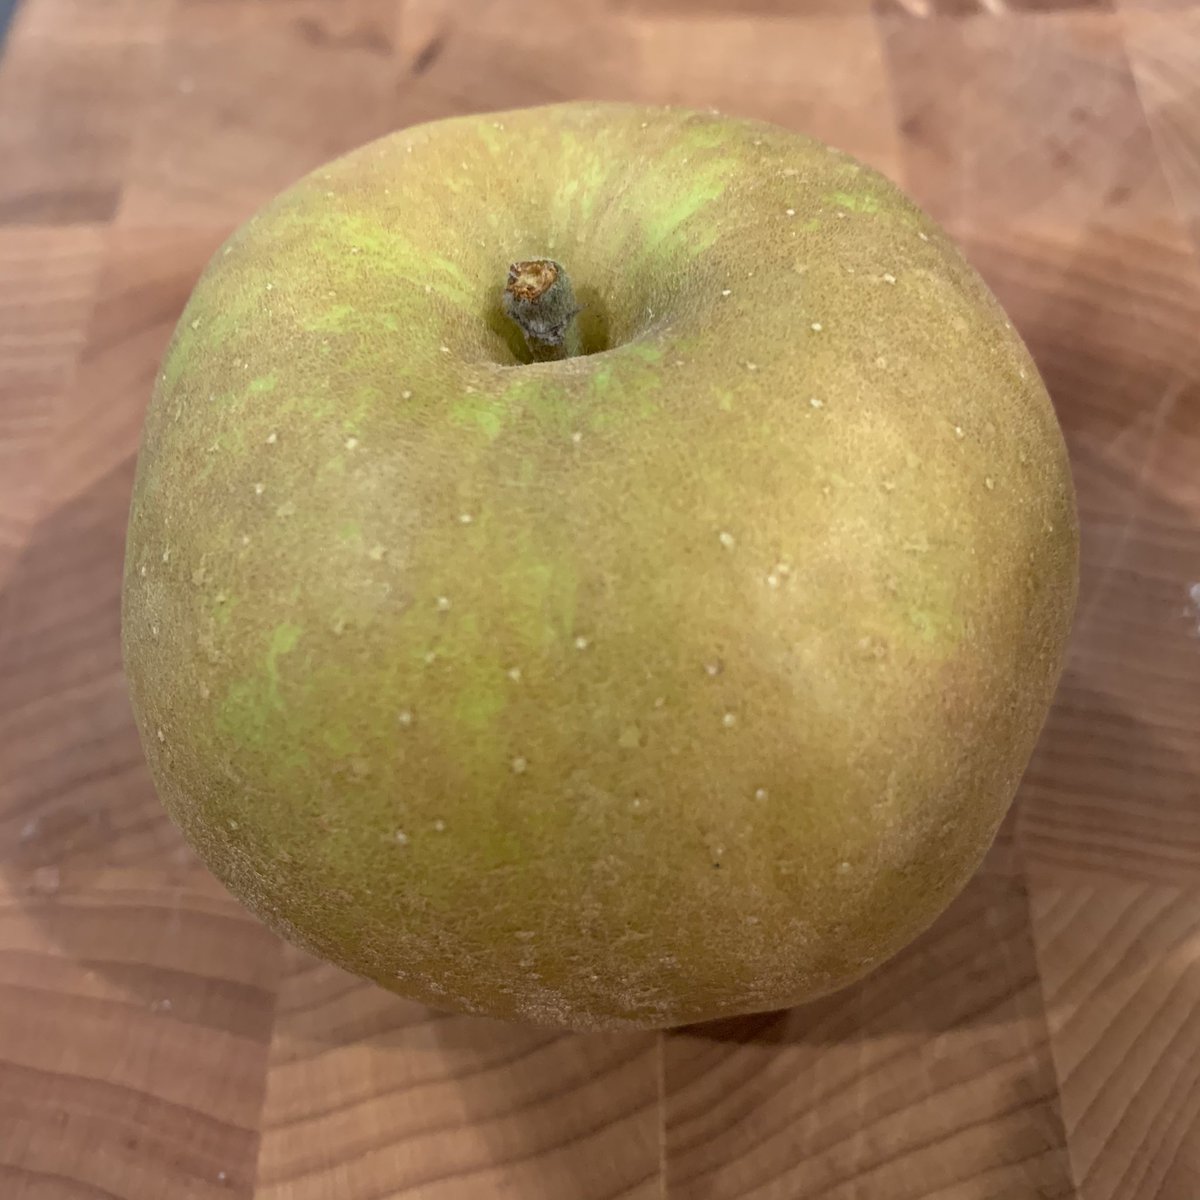 Ashmead’s Kernel is an old-world apple from the 1700s. It’s plain, with deeply russeted and thick skin - but the FLAVOR! Citrus-Pear?Sophisticated and versatile, Ashmead is the adult in the room — and would be as at home in a ploughman’s lunch or on a king’s cheeseboard. 9/10